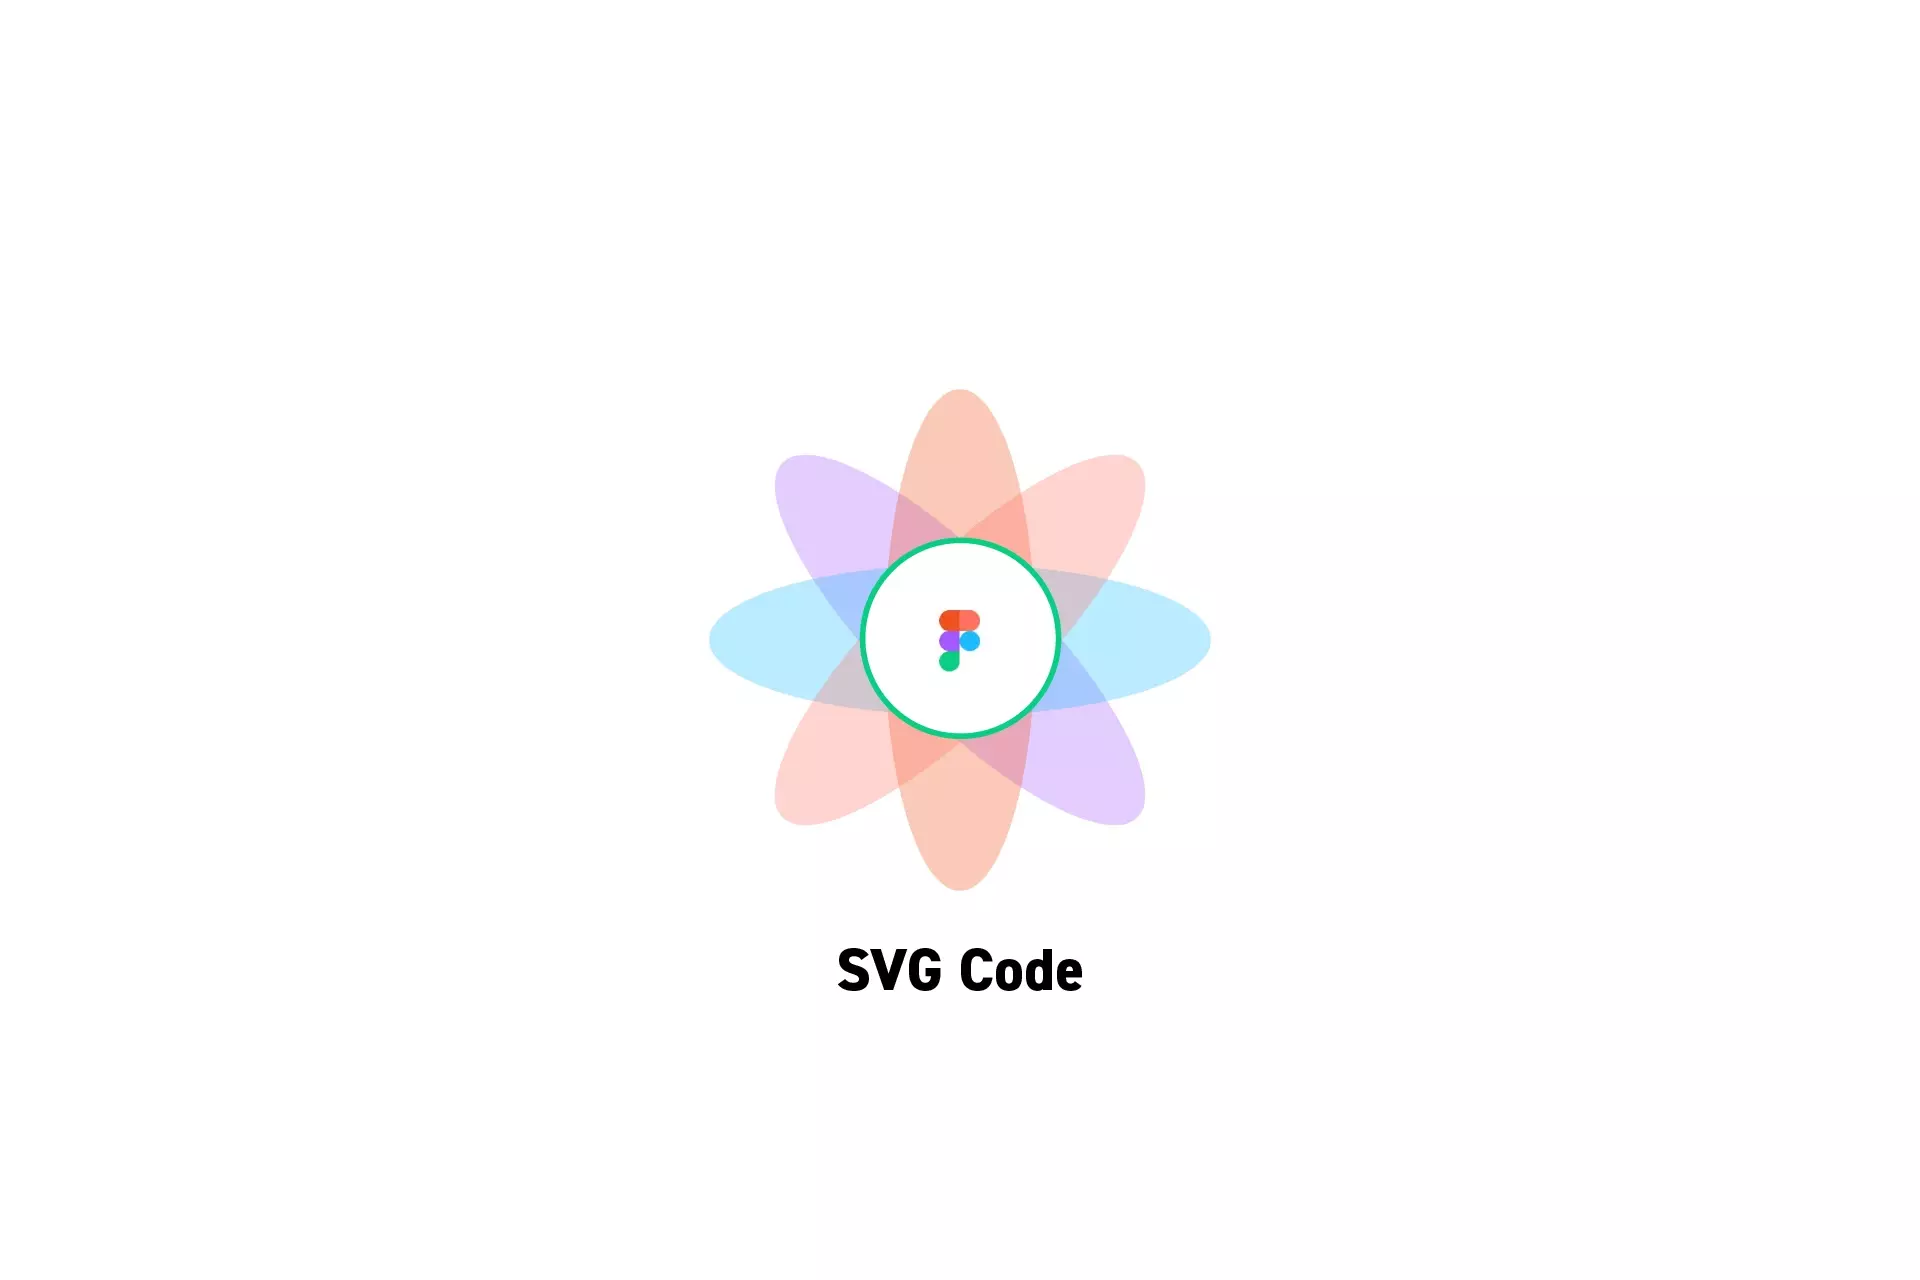 A flower that represents Figma with the text "SVG Code" beneath it.